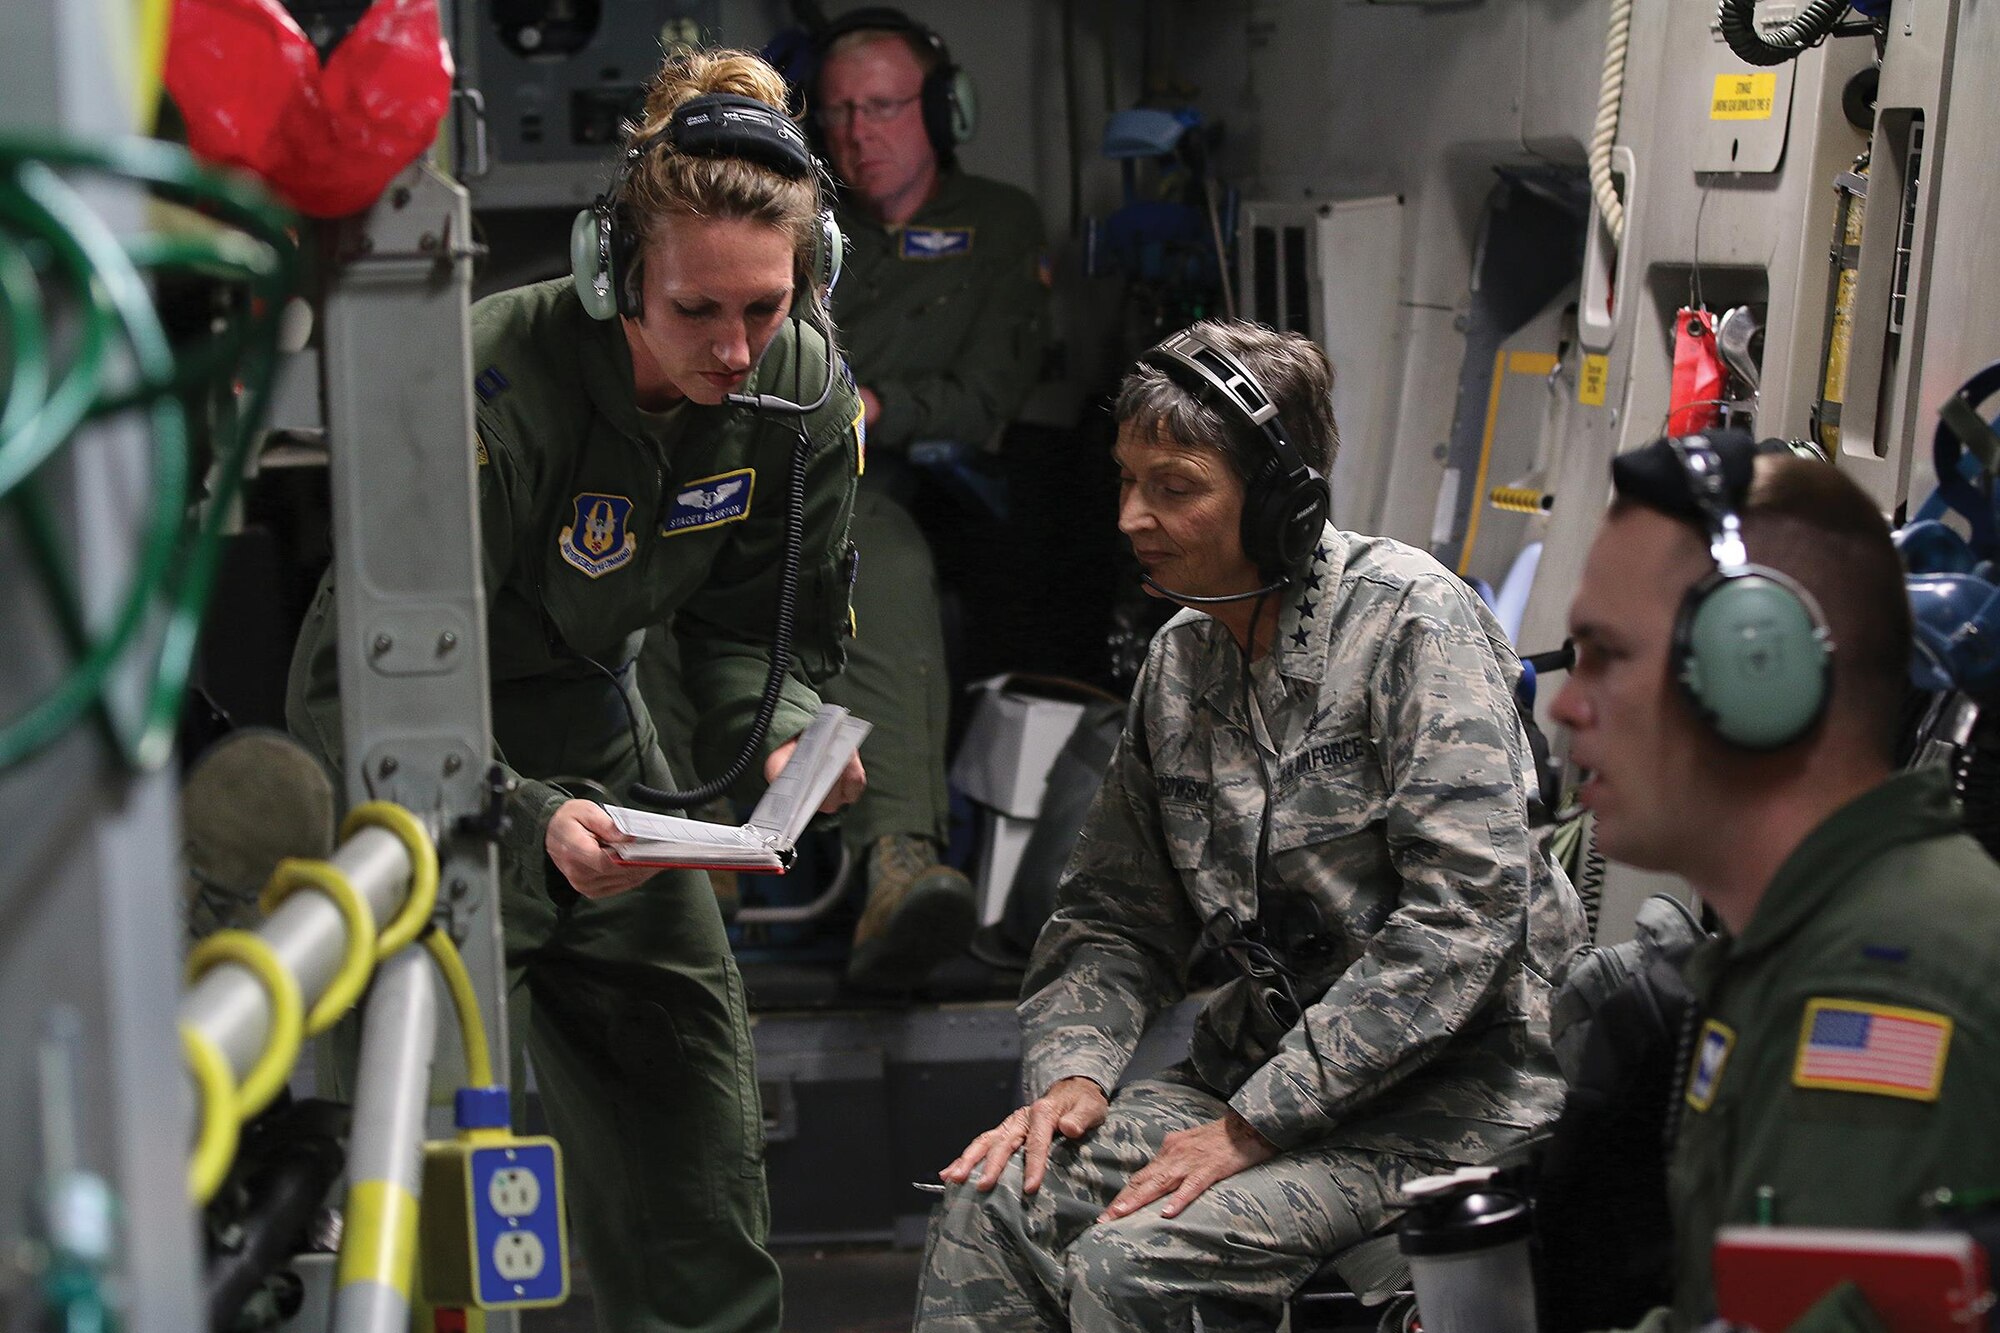 Capt. Stacey Blurton, 445th Aeromedical Evacuation Squadron flight nurse, explains to Gen. Ellen Pawlikowski, Commander, Air Force Materiel Command, the various checklists AES Airmen must follow for each flying mission during a training flight onboard a 445th Airlift Wing C-17 Globemaster III June 20, 2017. The general was shown the various equipment used by AES and saw the Airmen perform various medical emergency scenarios during the flight. (U.S. Air Force photo/Tech. Sgt. Patrick O’Reilly)